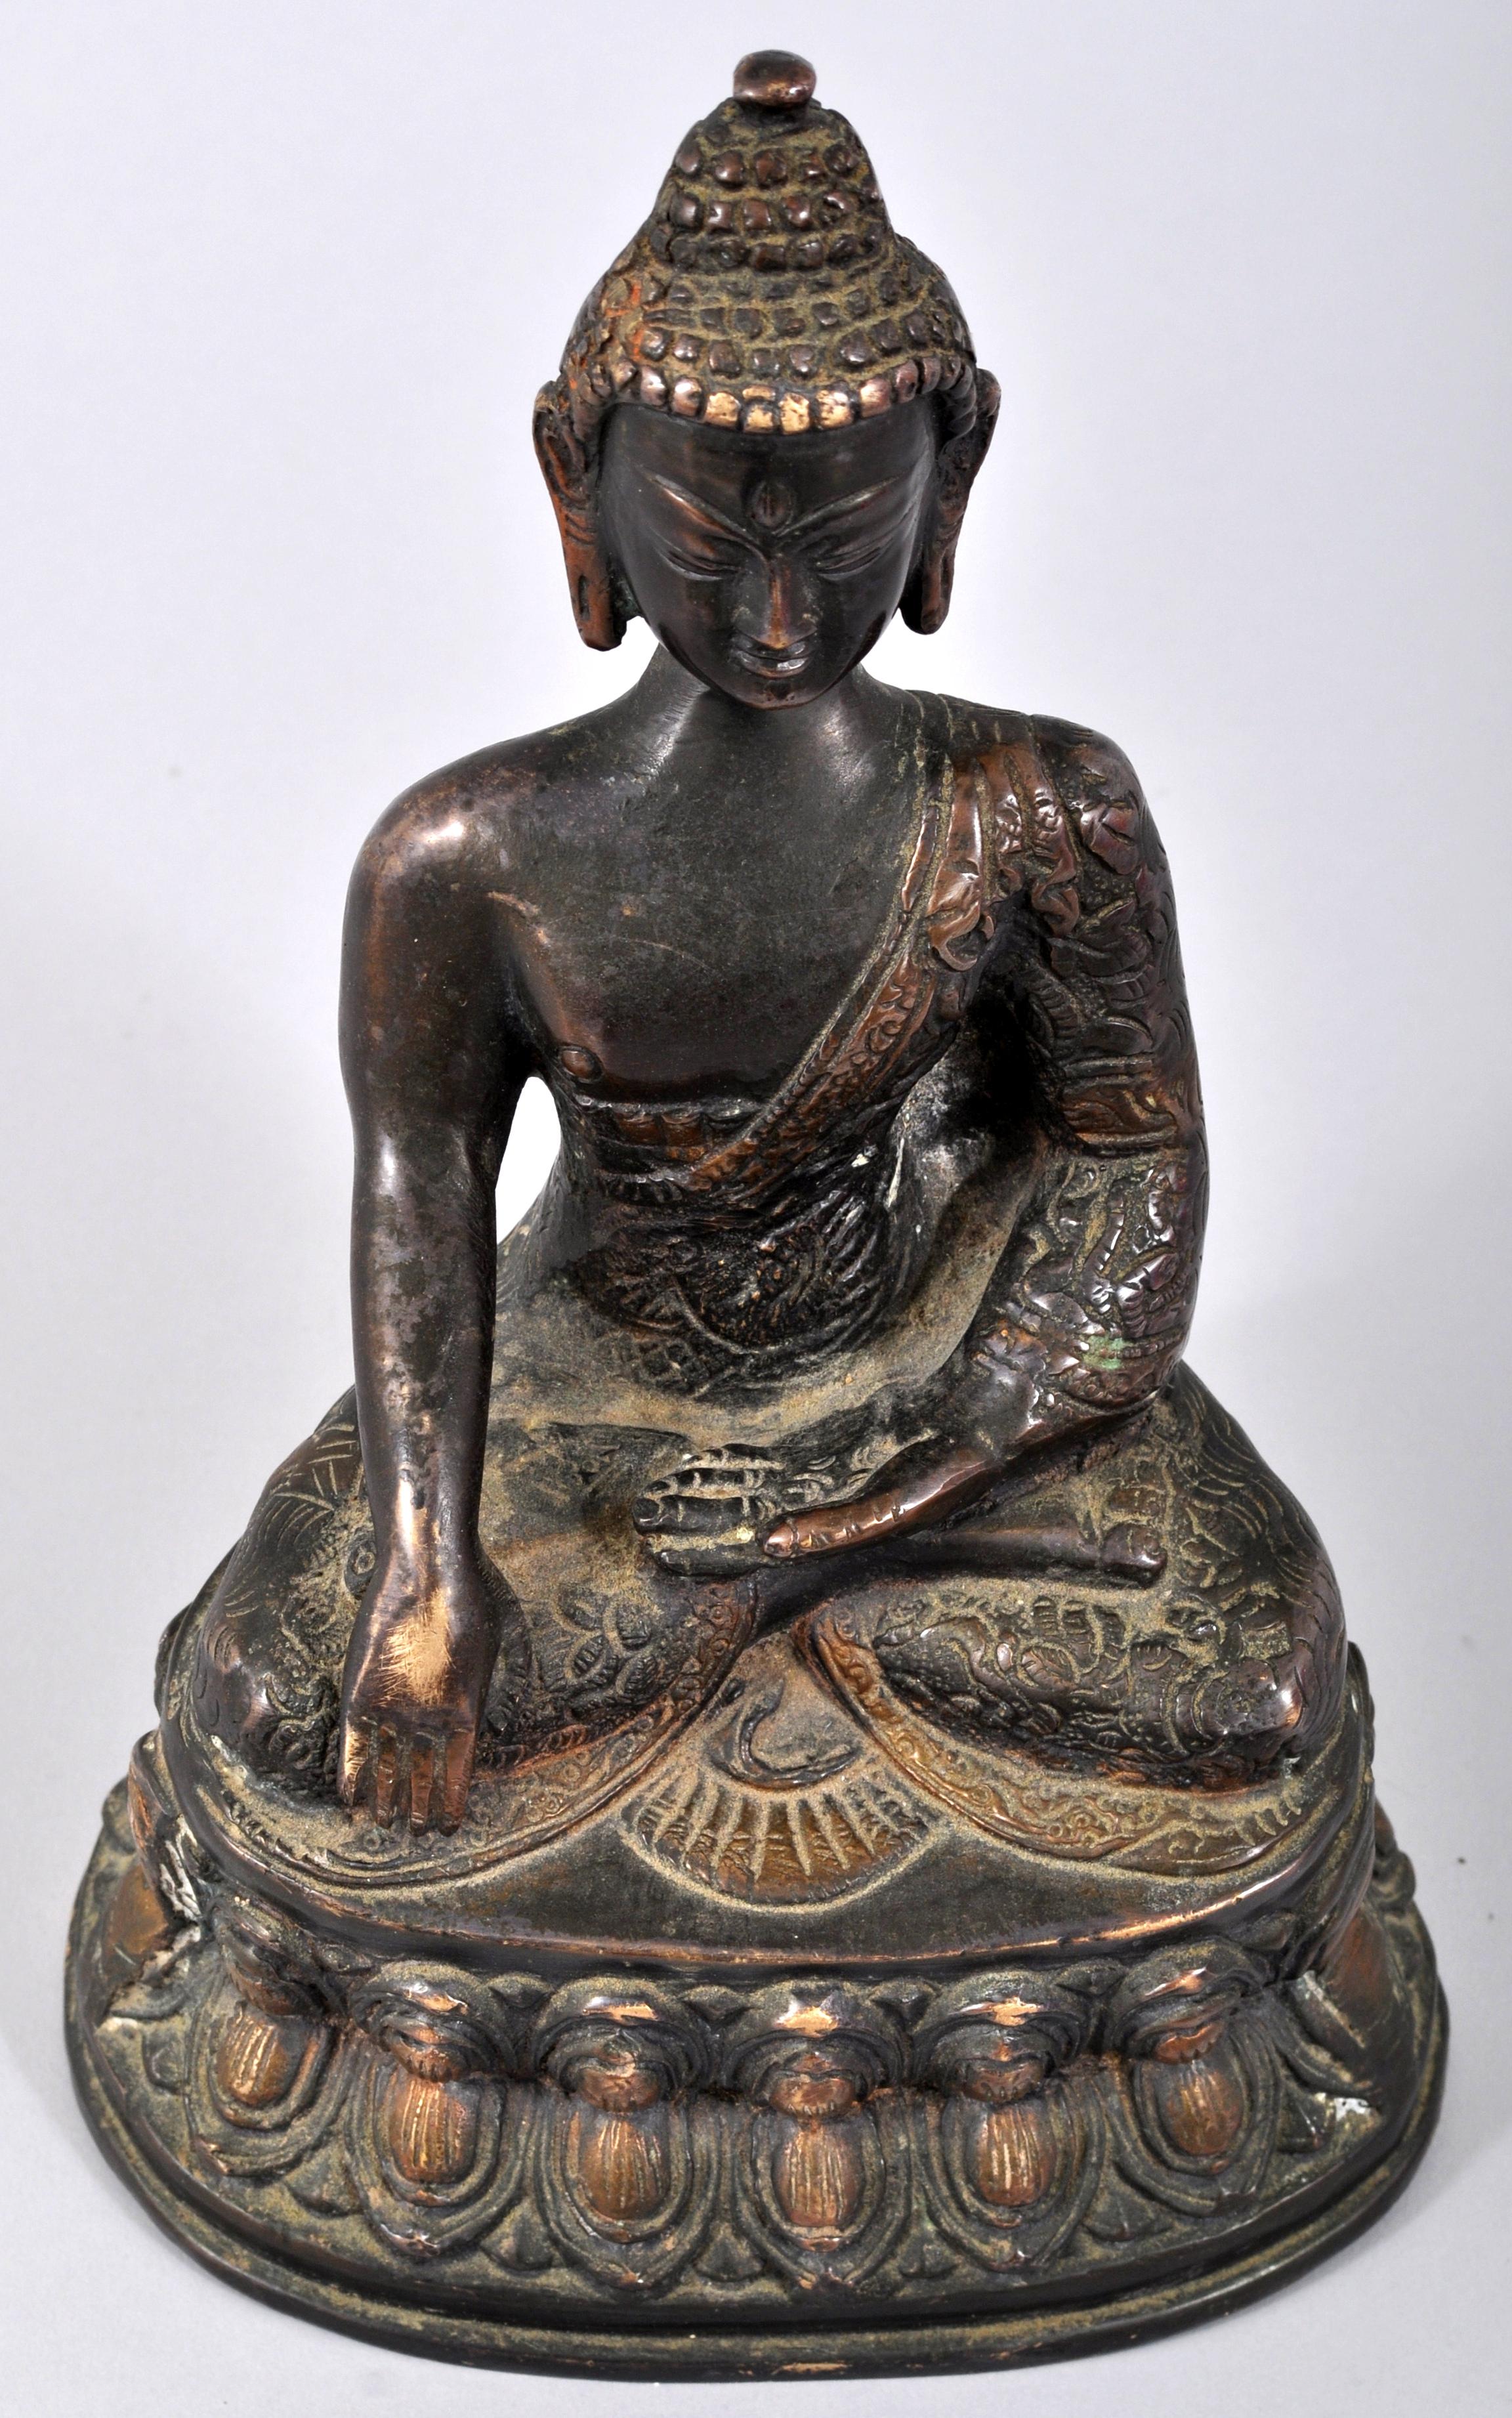 Antique 18th century Chinese bronze Shakyamuni Buddha Statue. The statue finely modeled as Buddha seated upon a lotus thrown in a meditative repose.